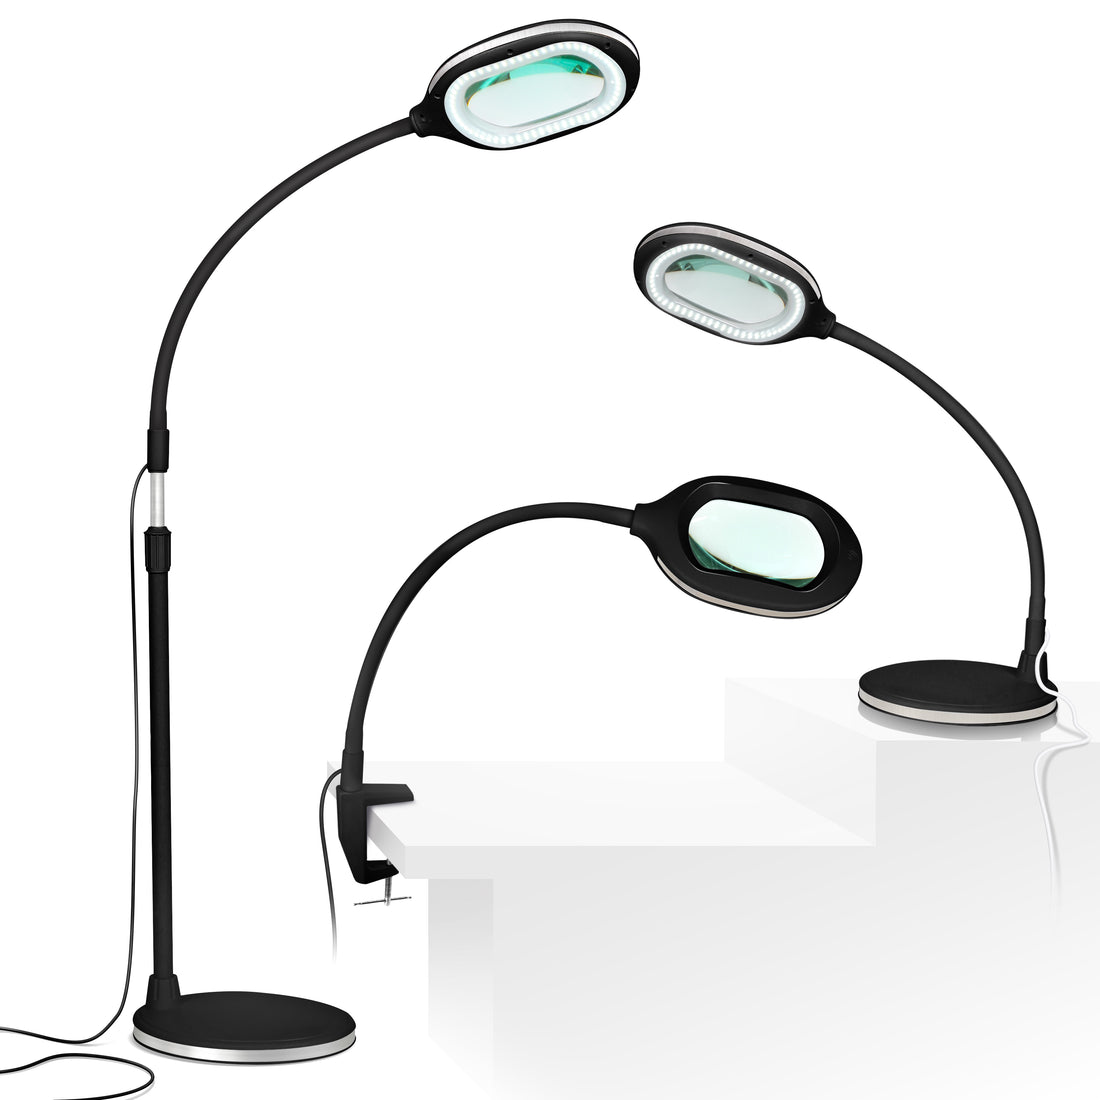 Brightech LightView PRO - Comfortable LED Magnifying Glass Desk Lamp for  Close Work - Bright 2.25x Magnifier Lighted Lens - Puzzle, Craft & Reading